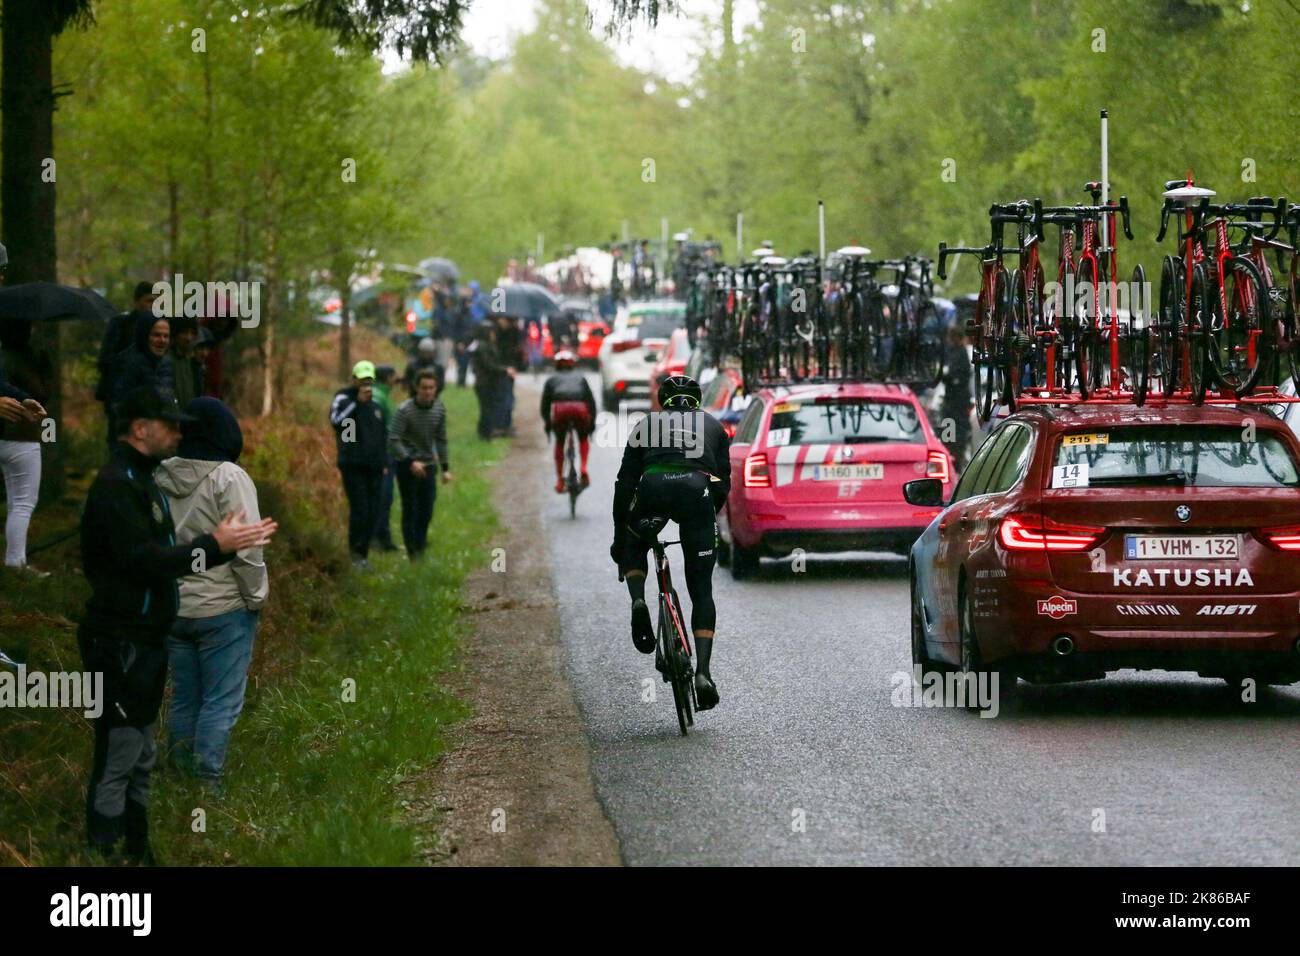 The climbs do their damage during the race as the back of the peloton stretches out Stock Photo